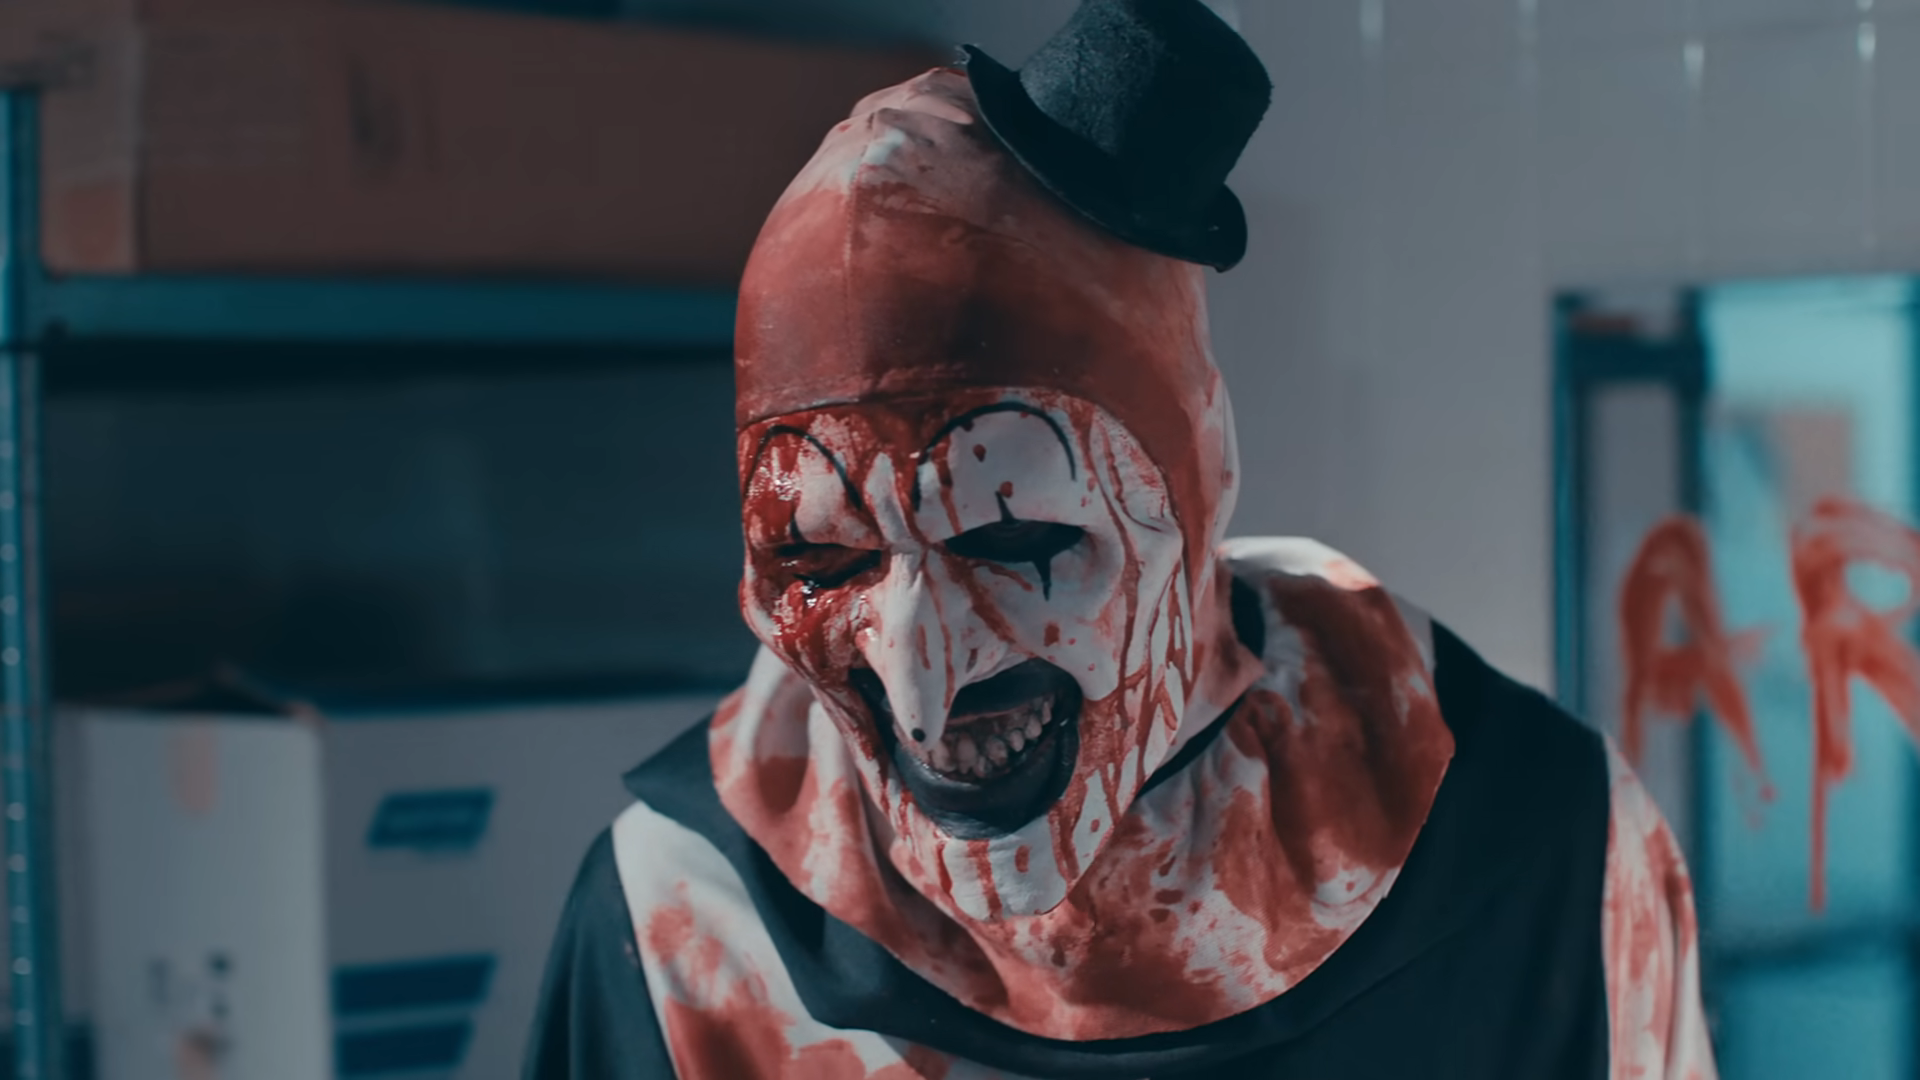 Art the Clown covered in blood and grinning